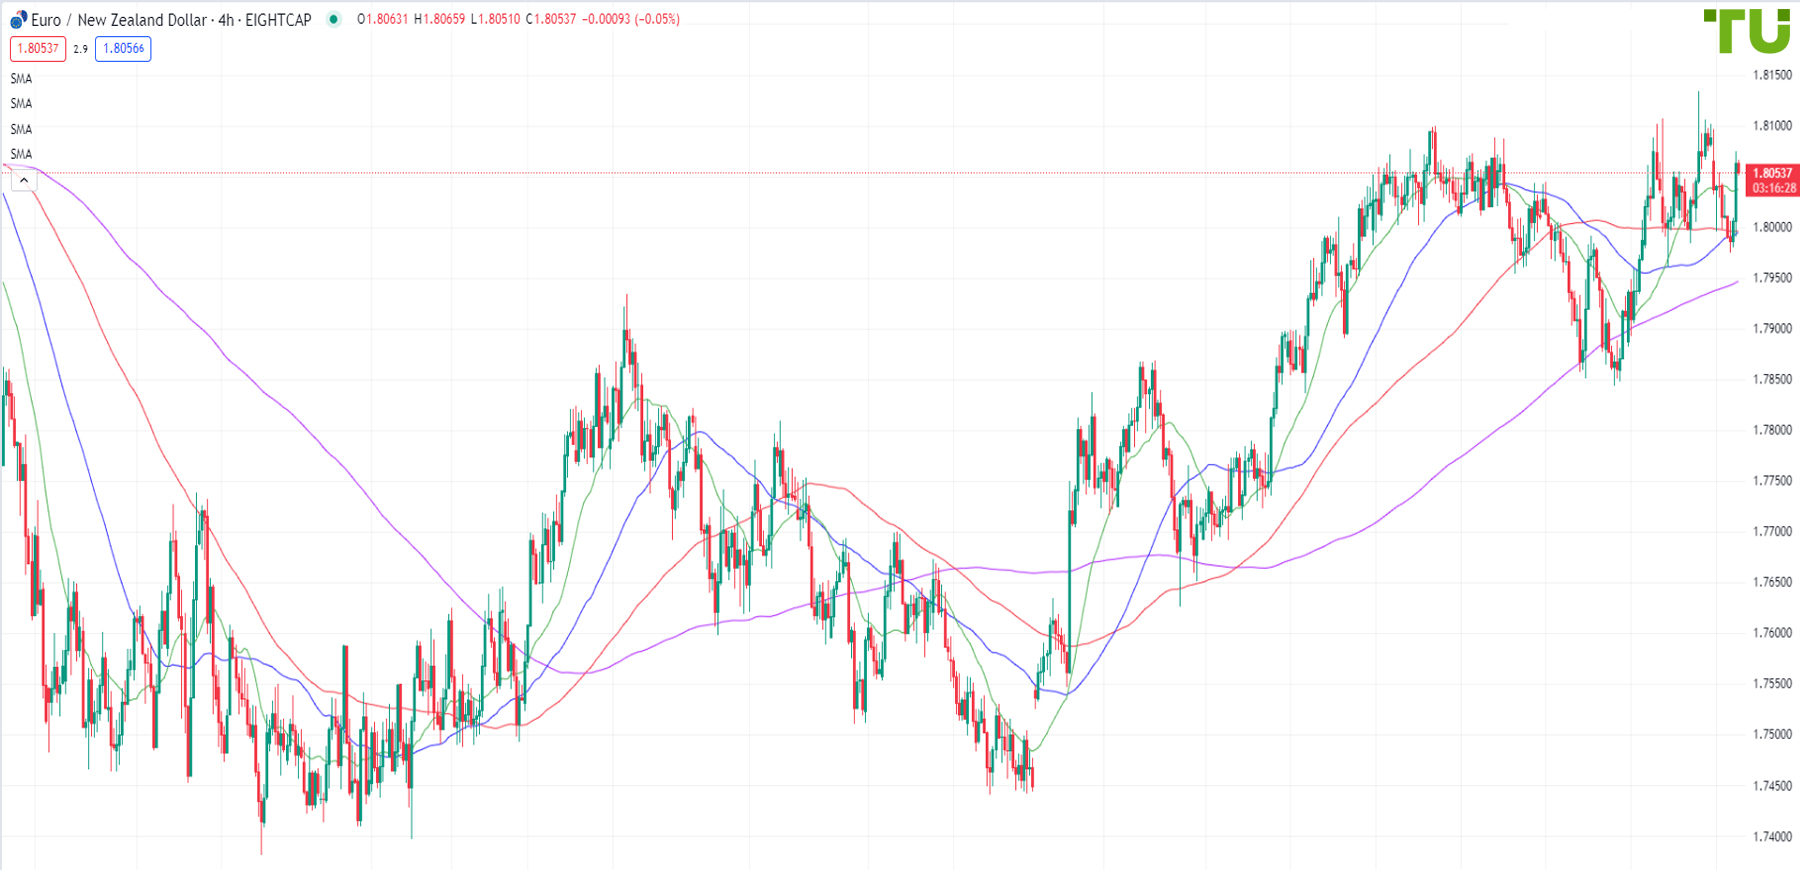 EUR/NZD under pressure after the rise